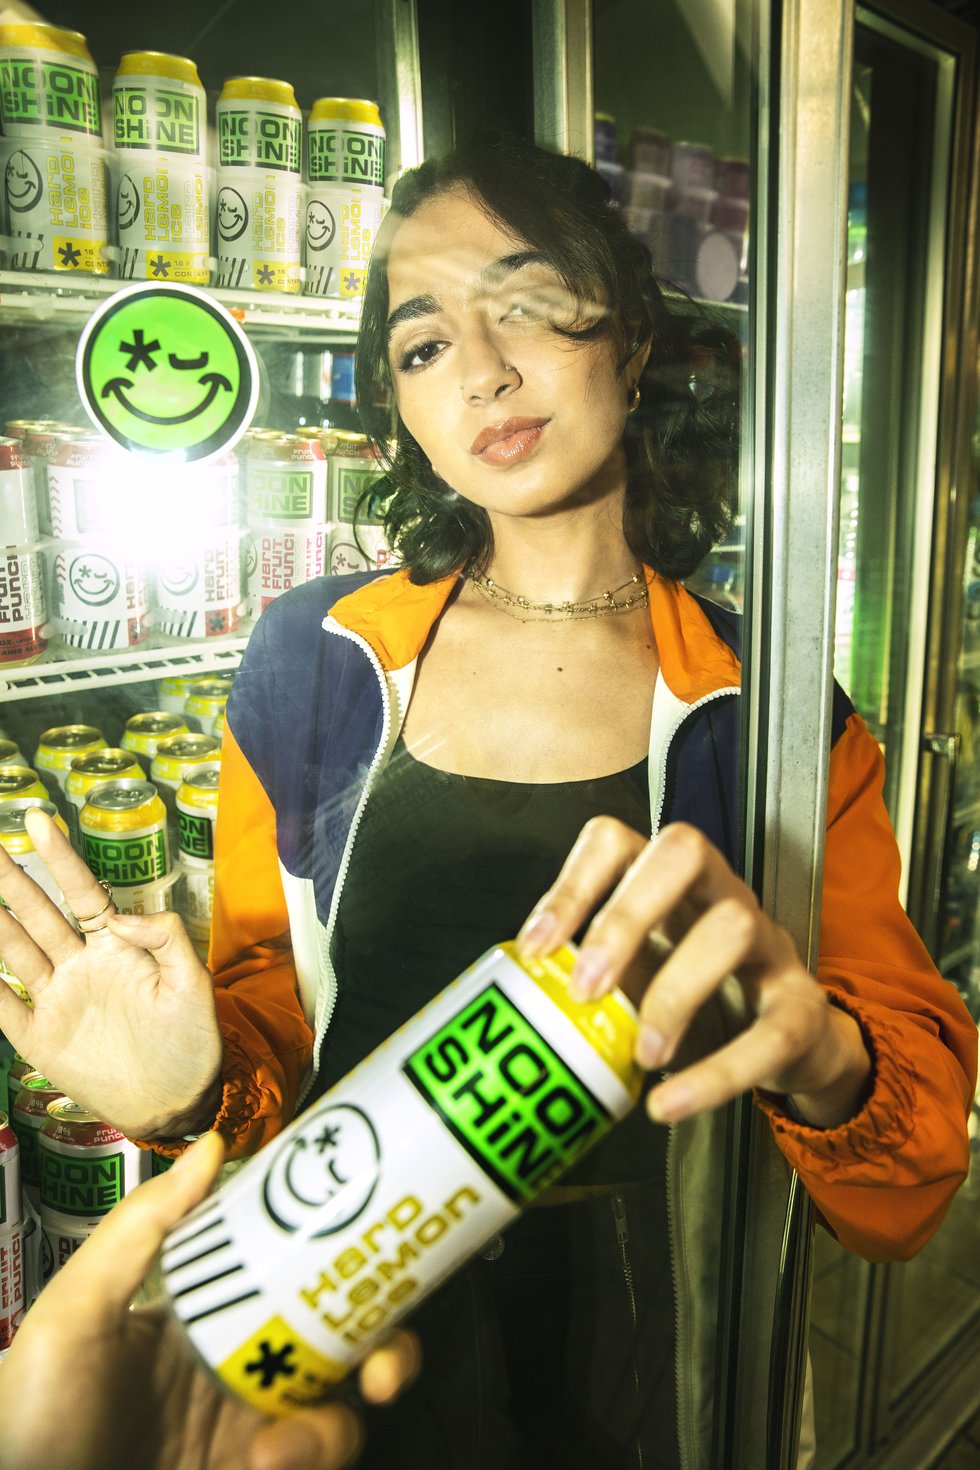 A girl handing a Noonshine Hard Lemonade Ice can from a fridge to another person (out of frame).